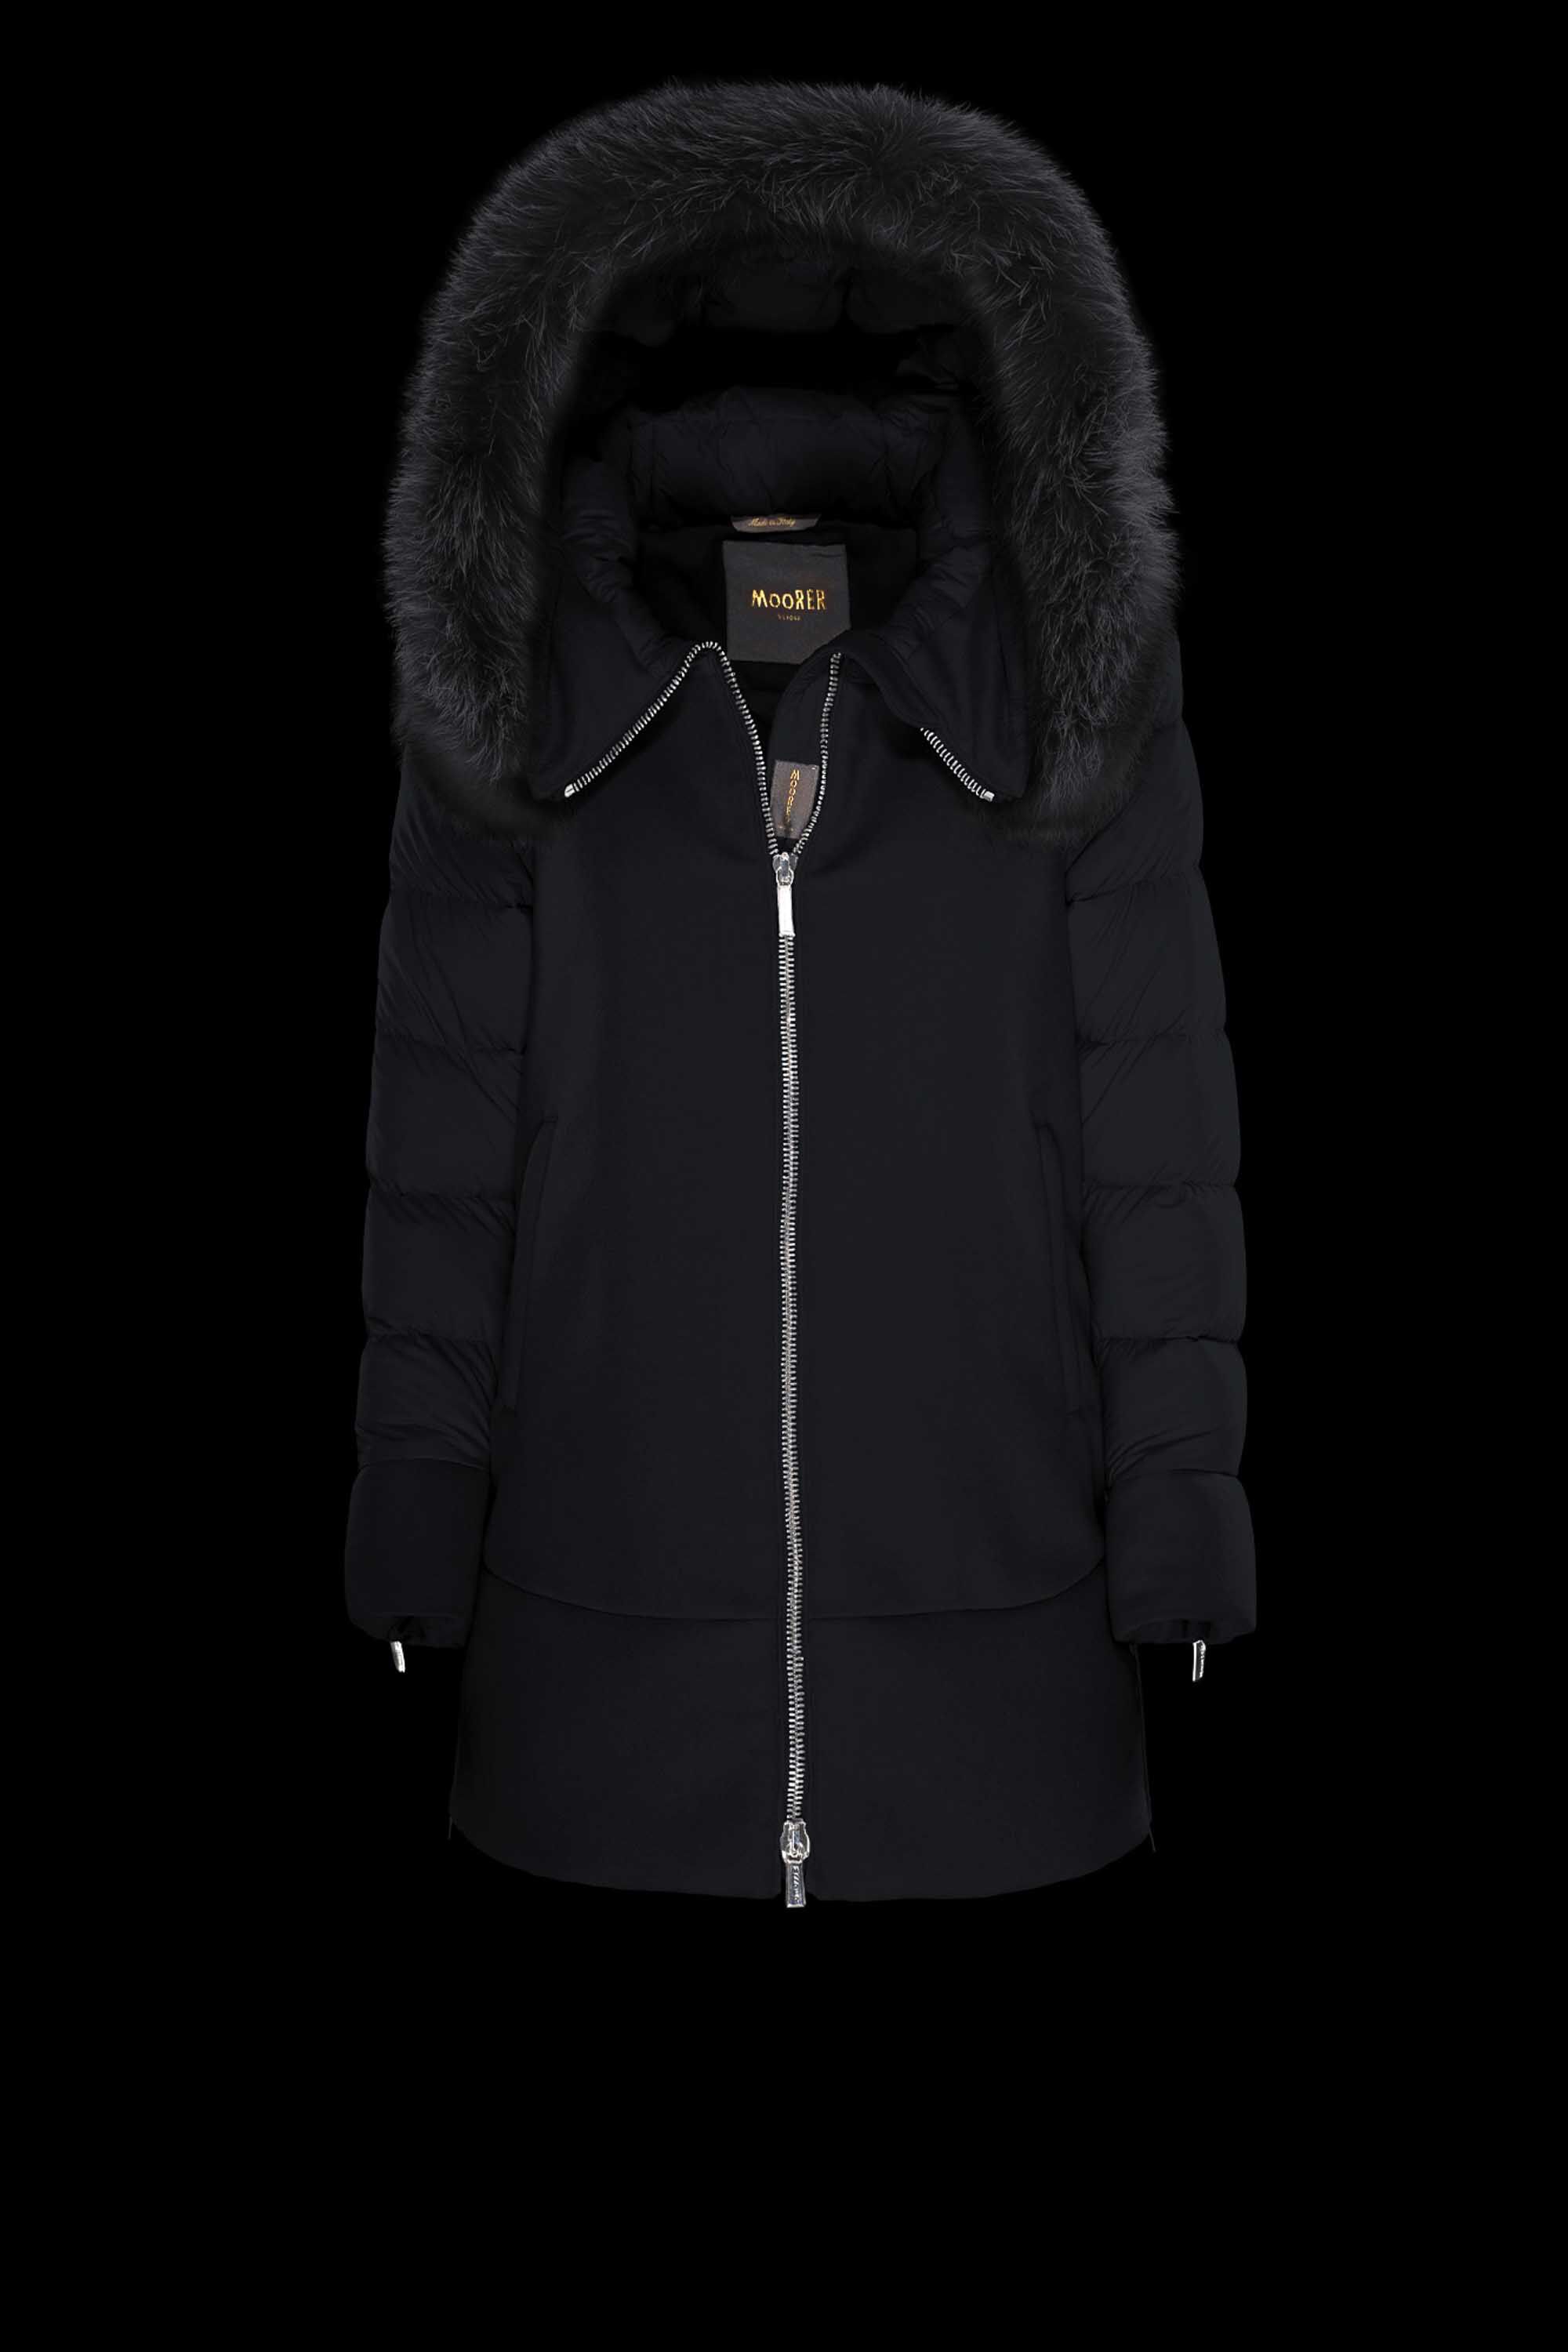 Women's Luxury Coats, Clothing and Accessories | MooRER®